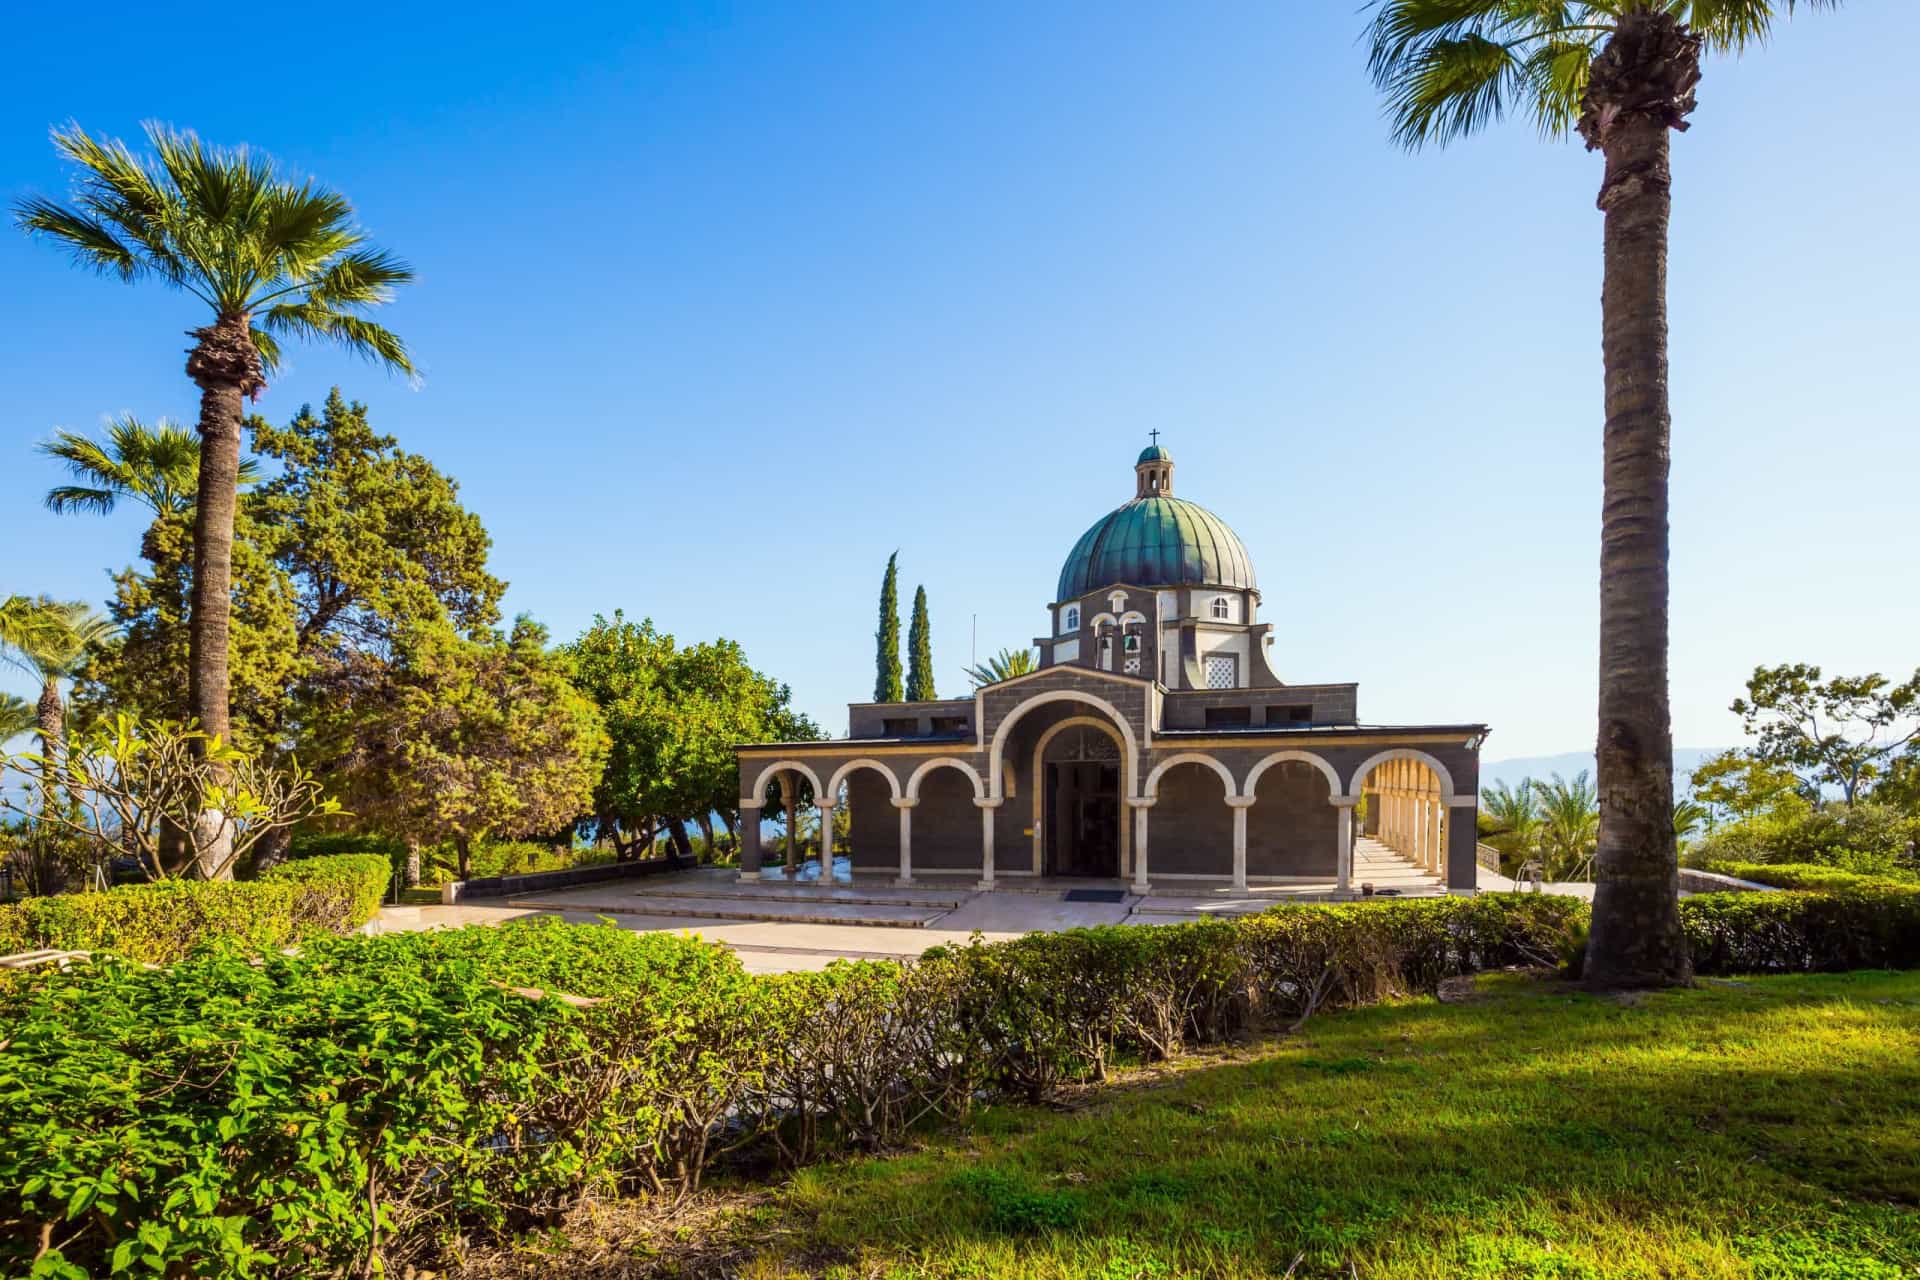 <p>The Mount of Beatitudes in northern Israel is believed to be where Jesus preached the Sermon on the Mount. The Roman Catholic Franciscan chapel marking the summit was built in 1937-38 and welcomed Pope John Paul II in March 2000.</p>